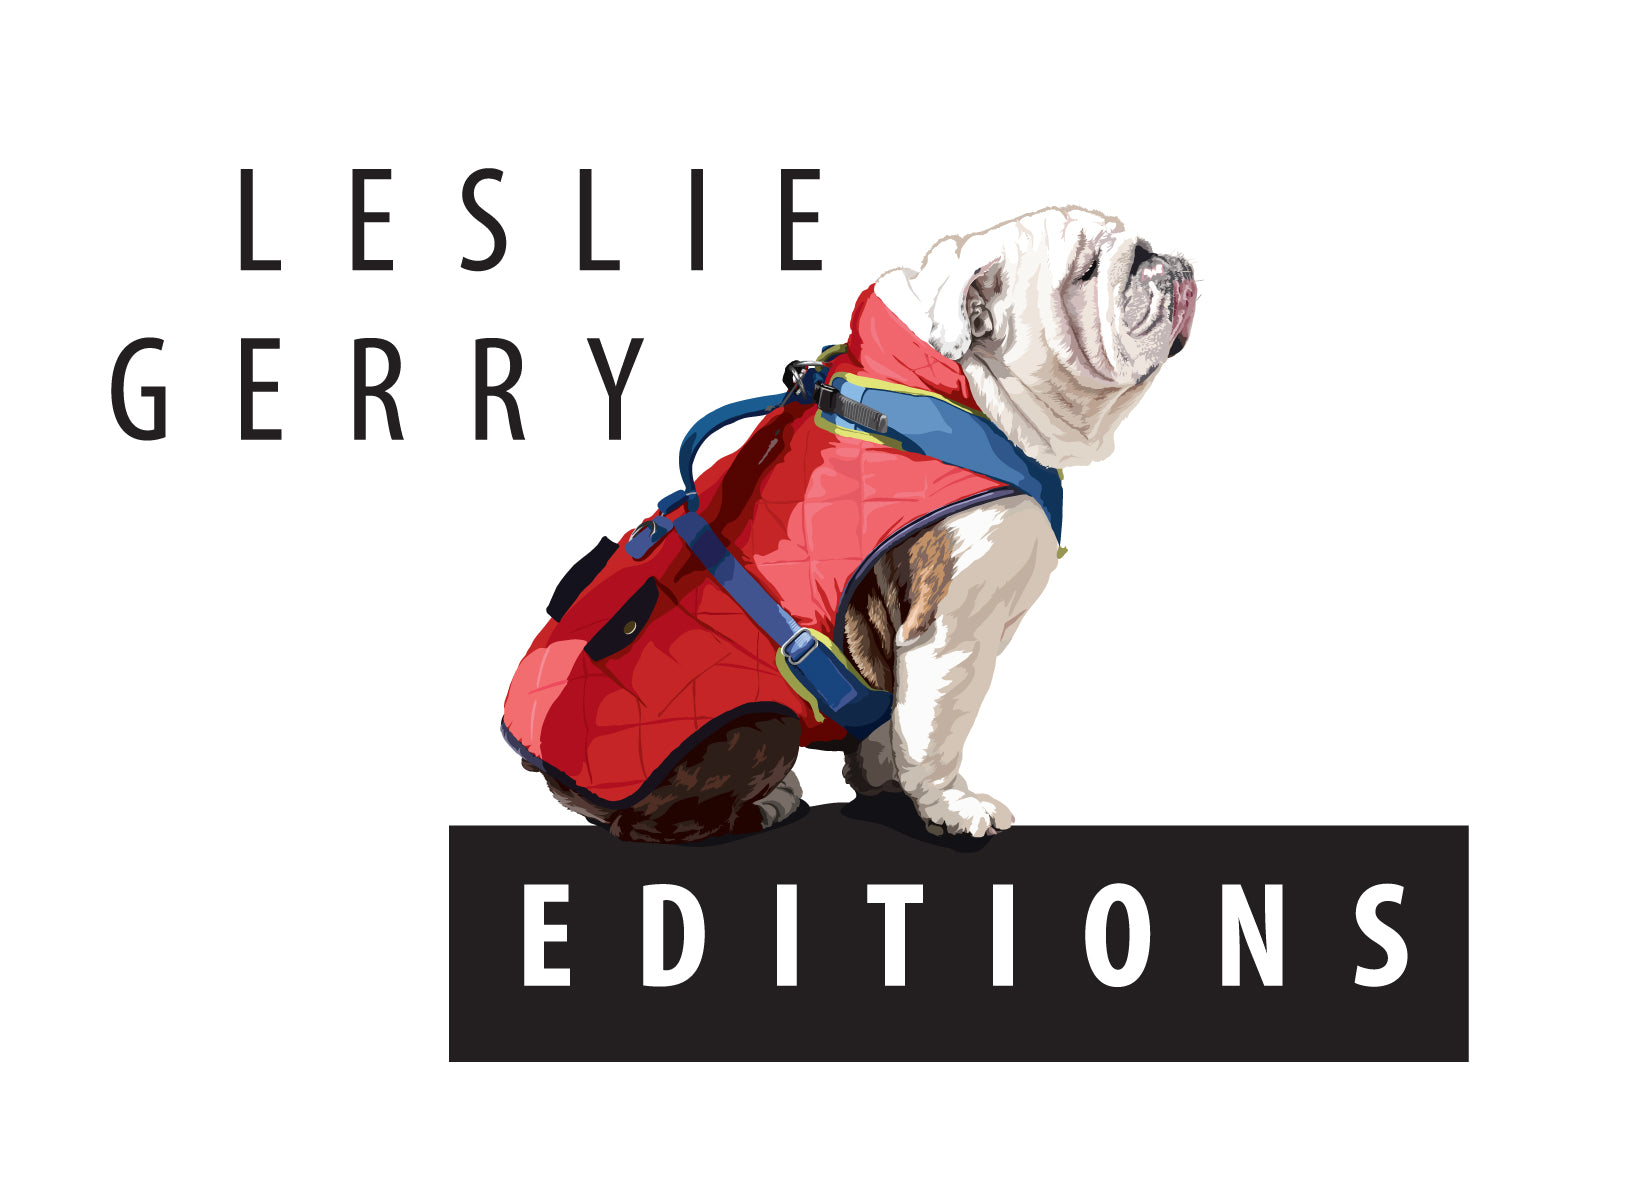 Leslie Gerry Editions